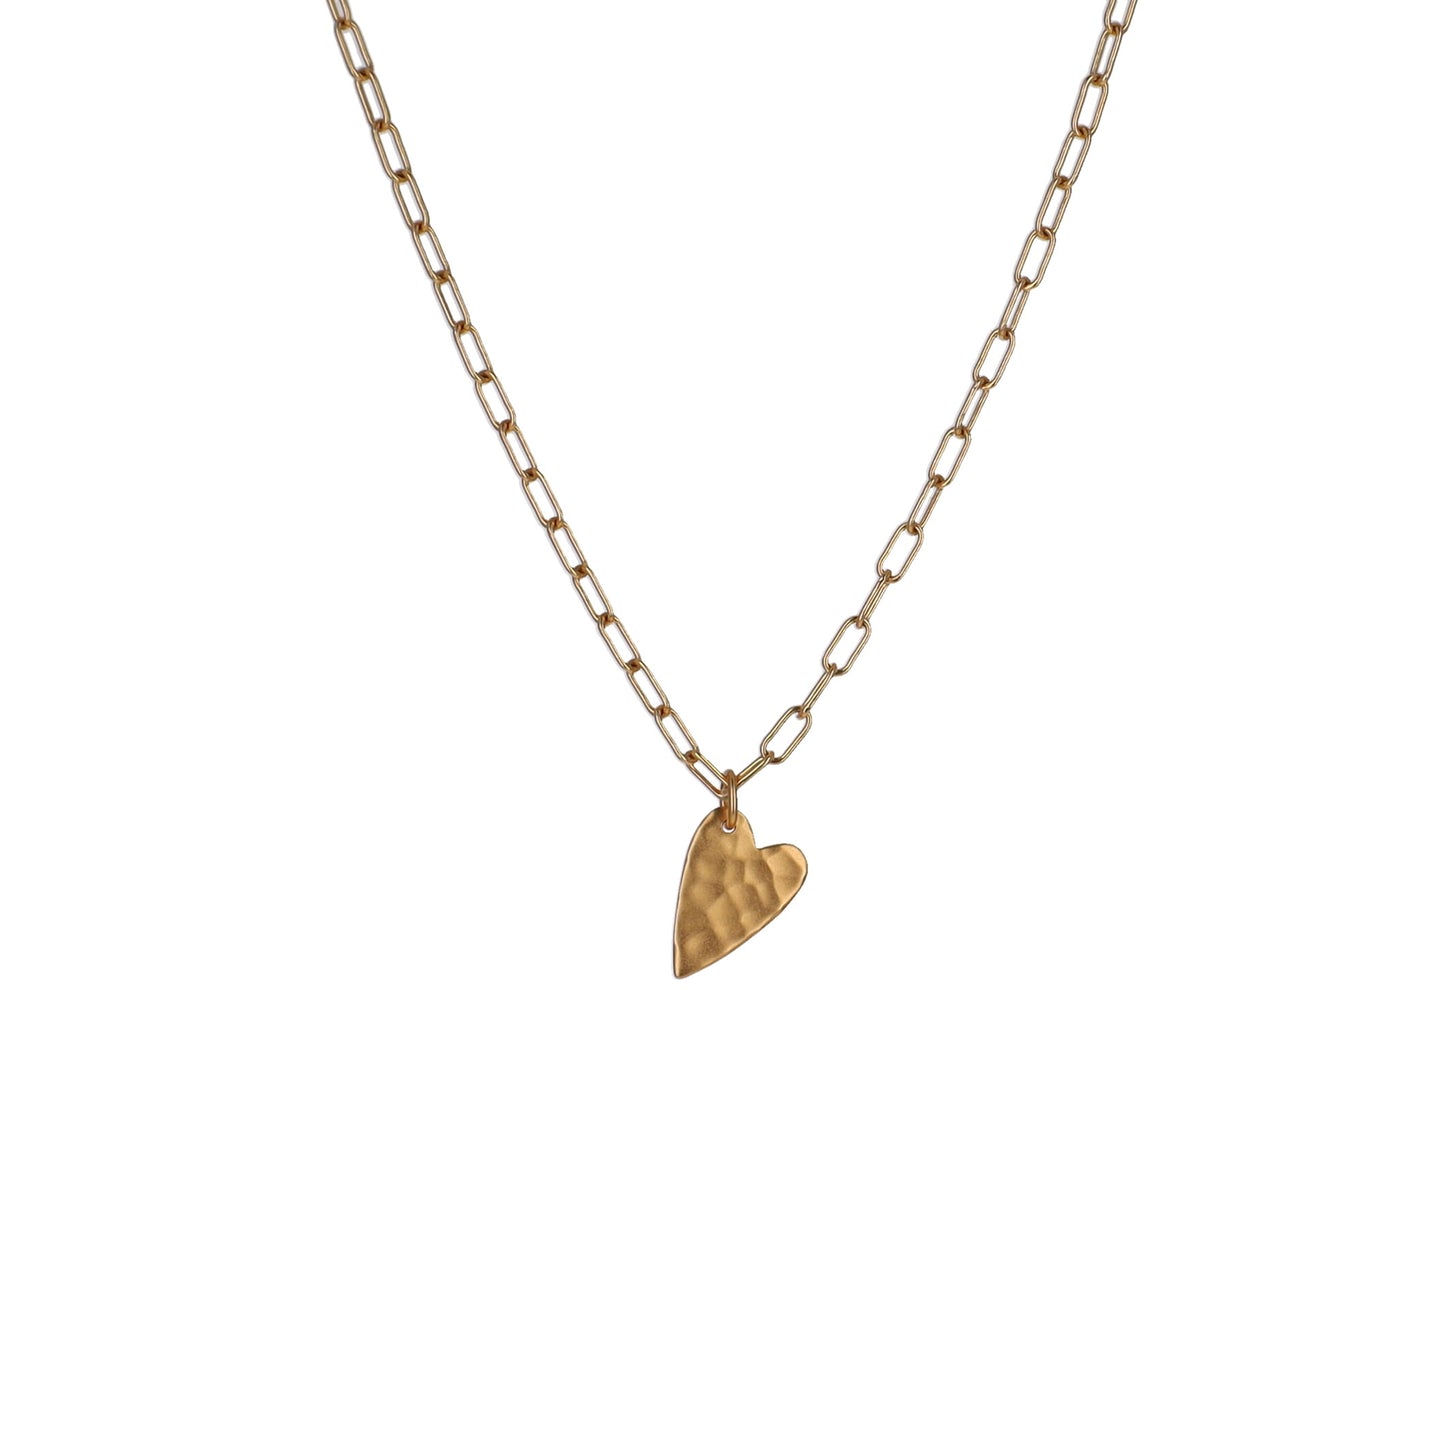 Hammered Gold Heart Necklace